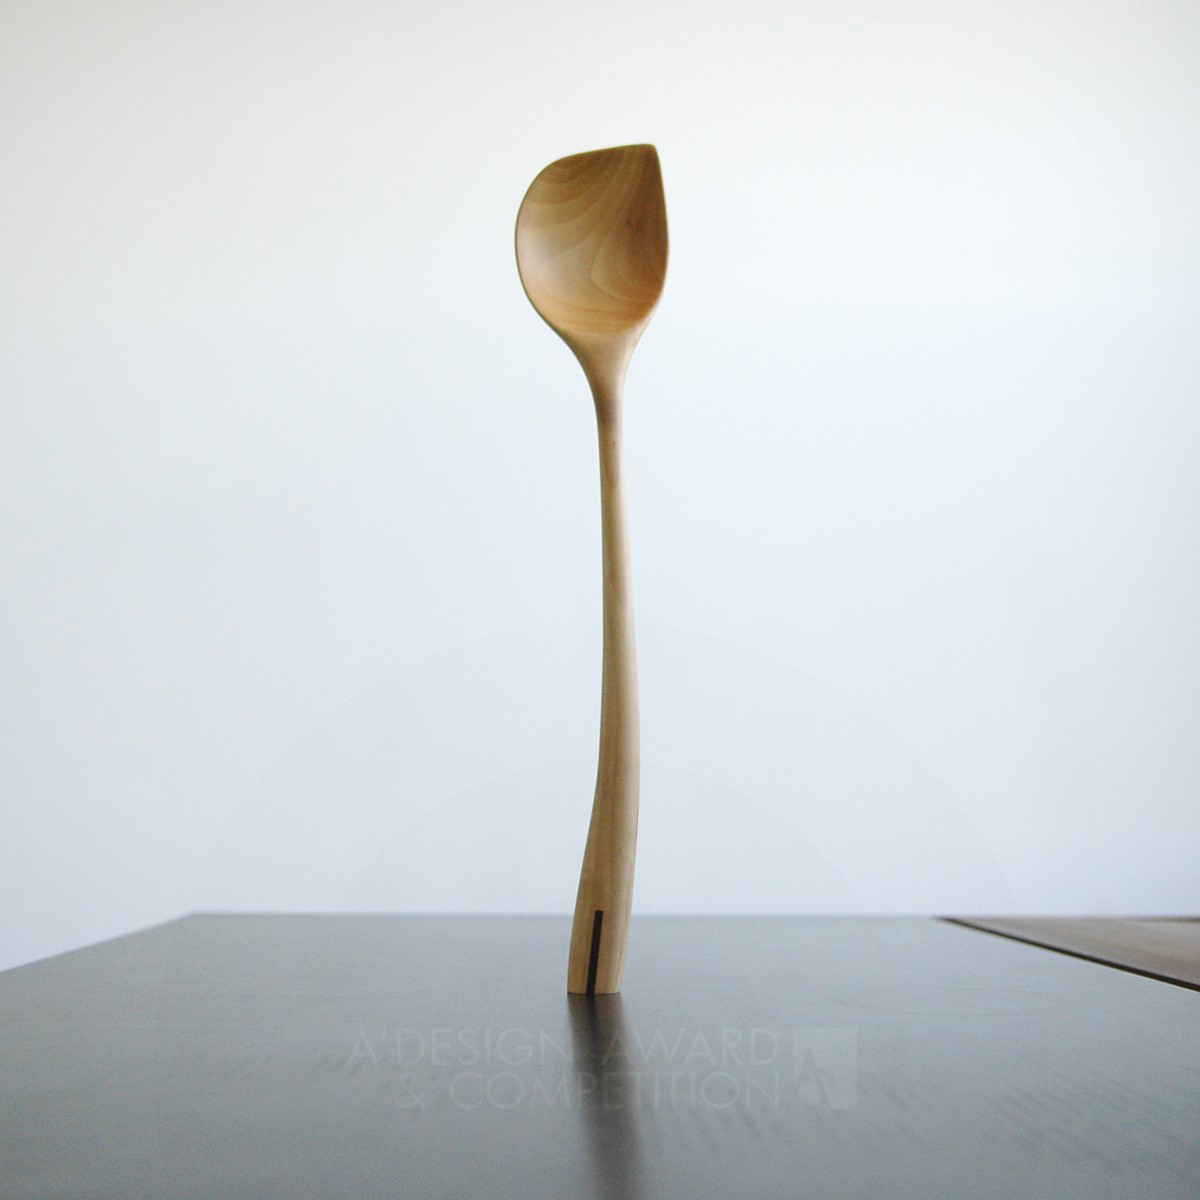 Balance Wooden Spoon by Christopher Han